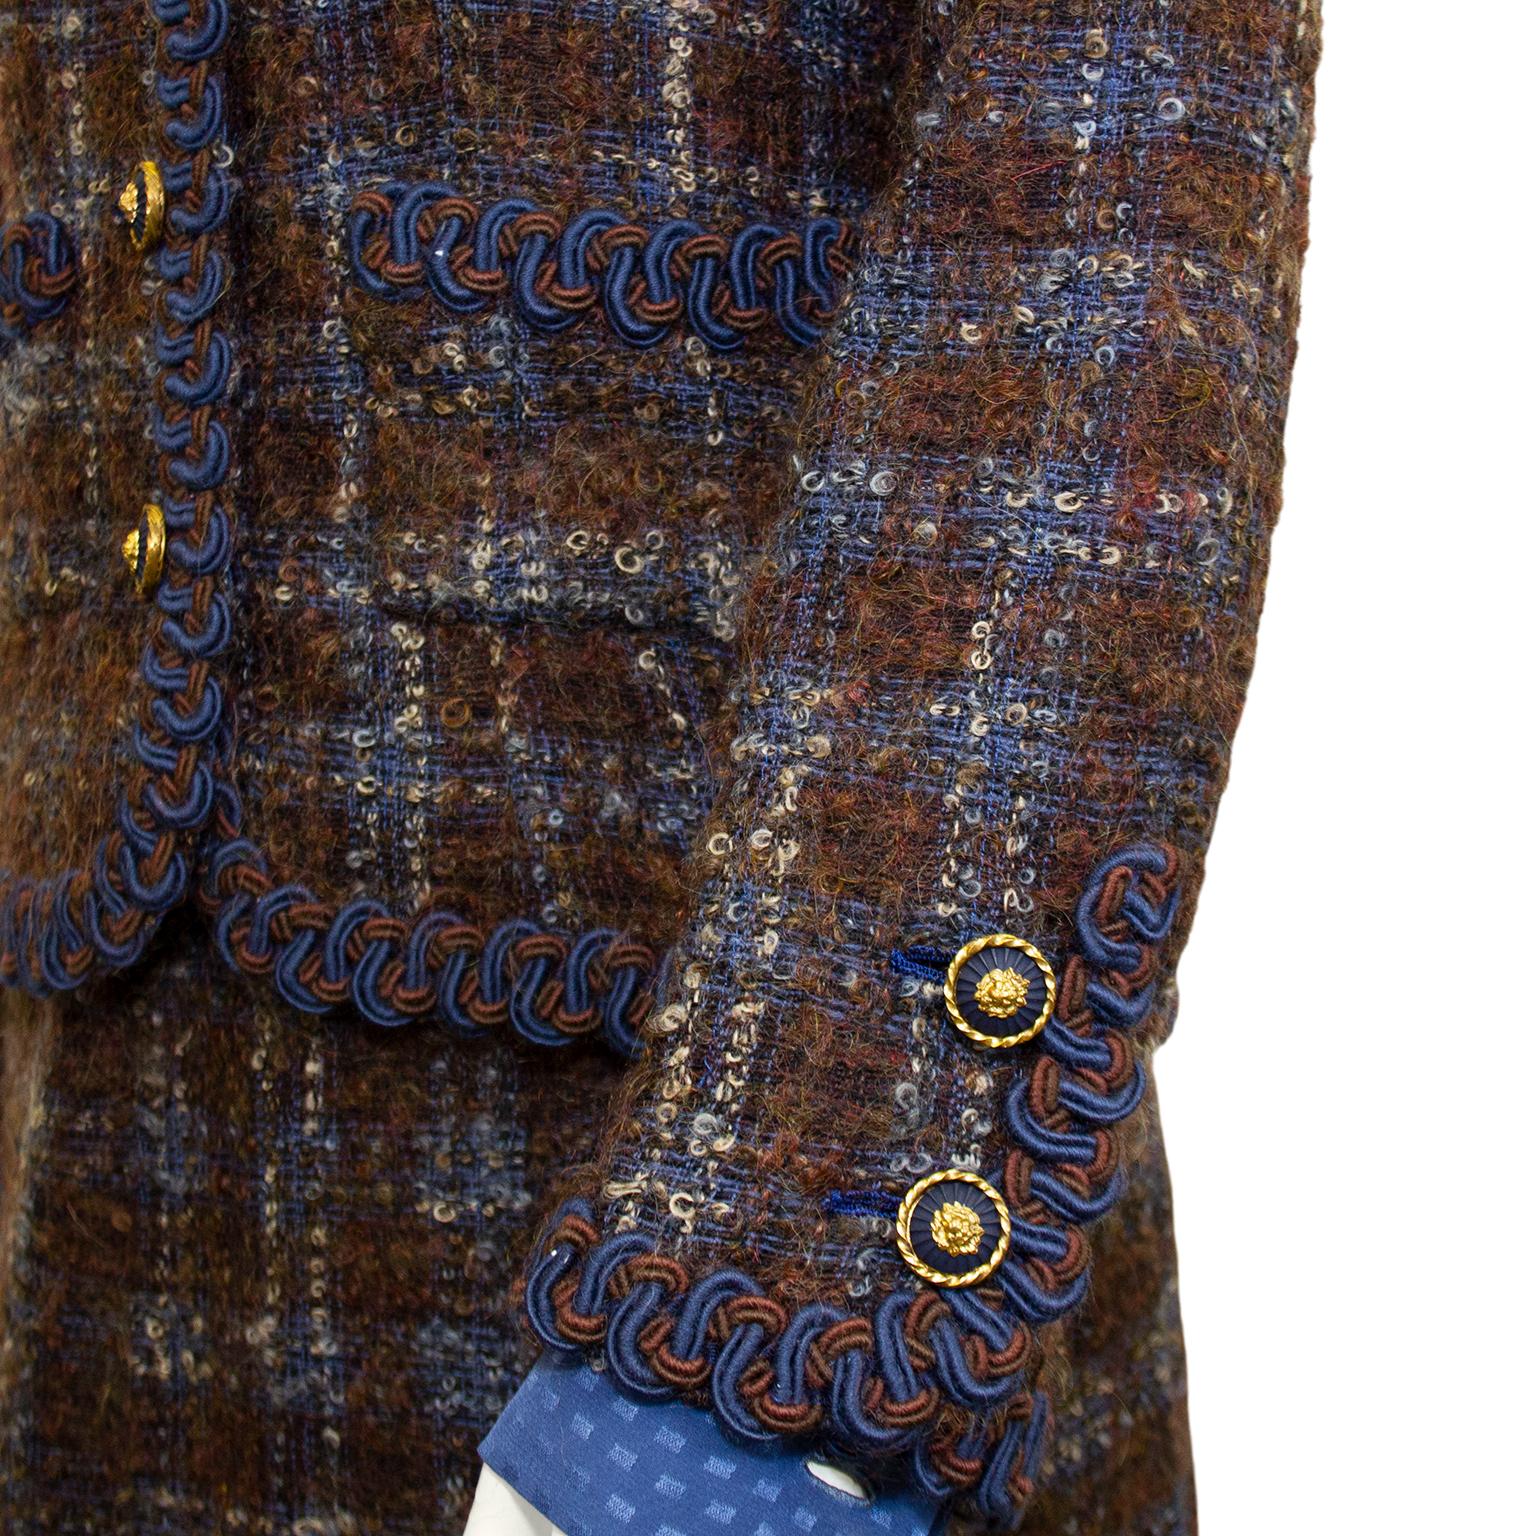 1981 Chanel Haute Couture Blue and Brown Tweed 5 Piece Skirt Suit 4